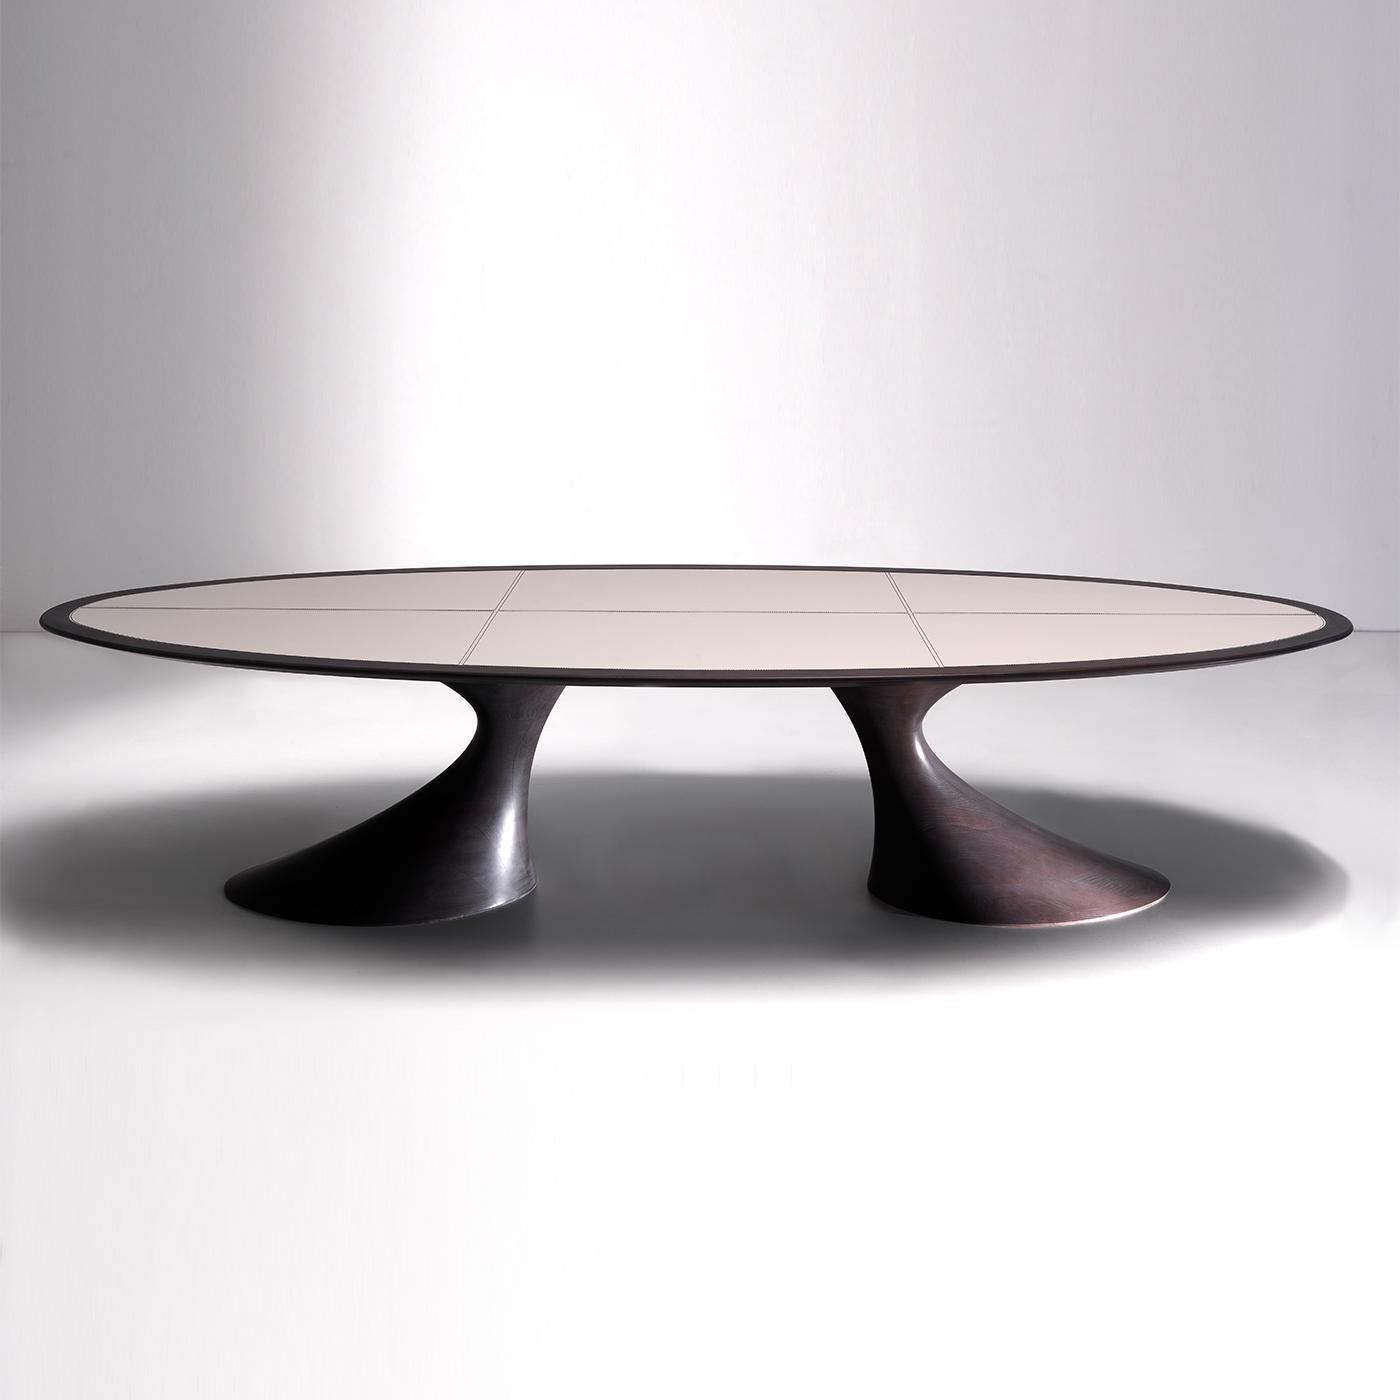 This sculptural dining table is a splendid piece of furnishing to gather around. Its intriguing profile is marked by smooth and dramatic curves in a design that will take center stage in any contemporary decor. The sinuous and eye-catching design of